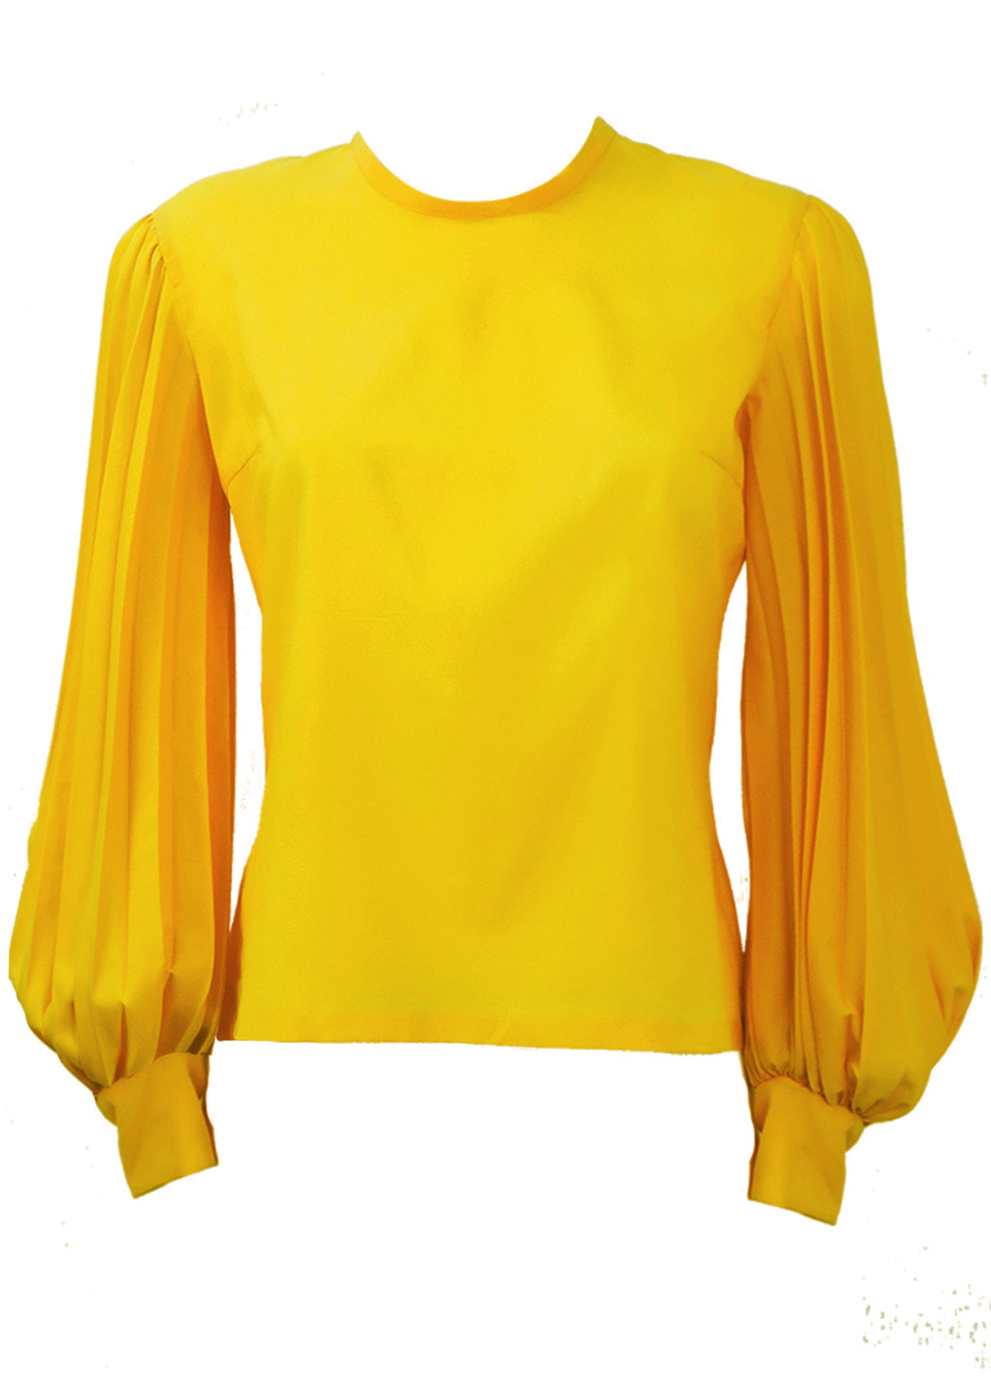 Vintage 60's Yellow Blouse with Pleat Detail Balloon Sleeves - M ...